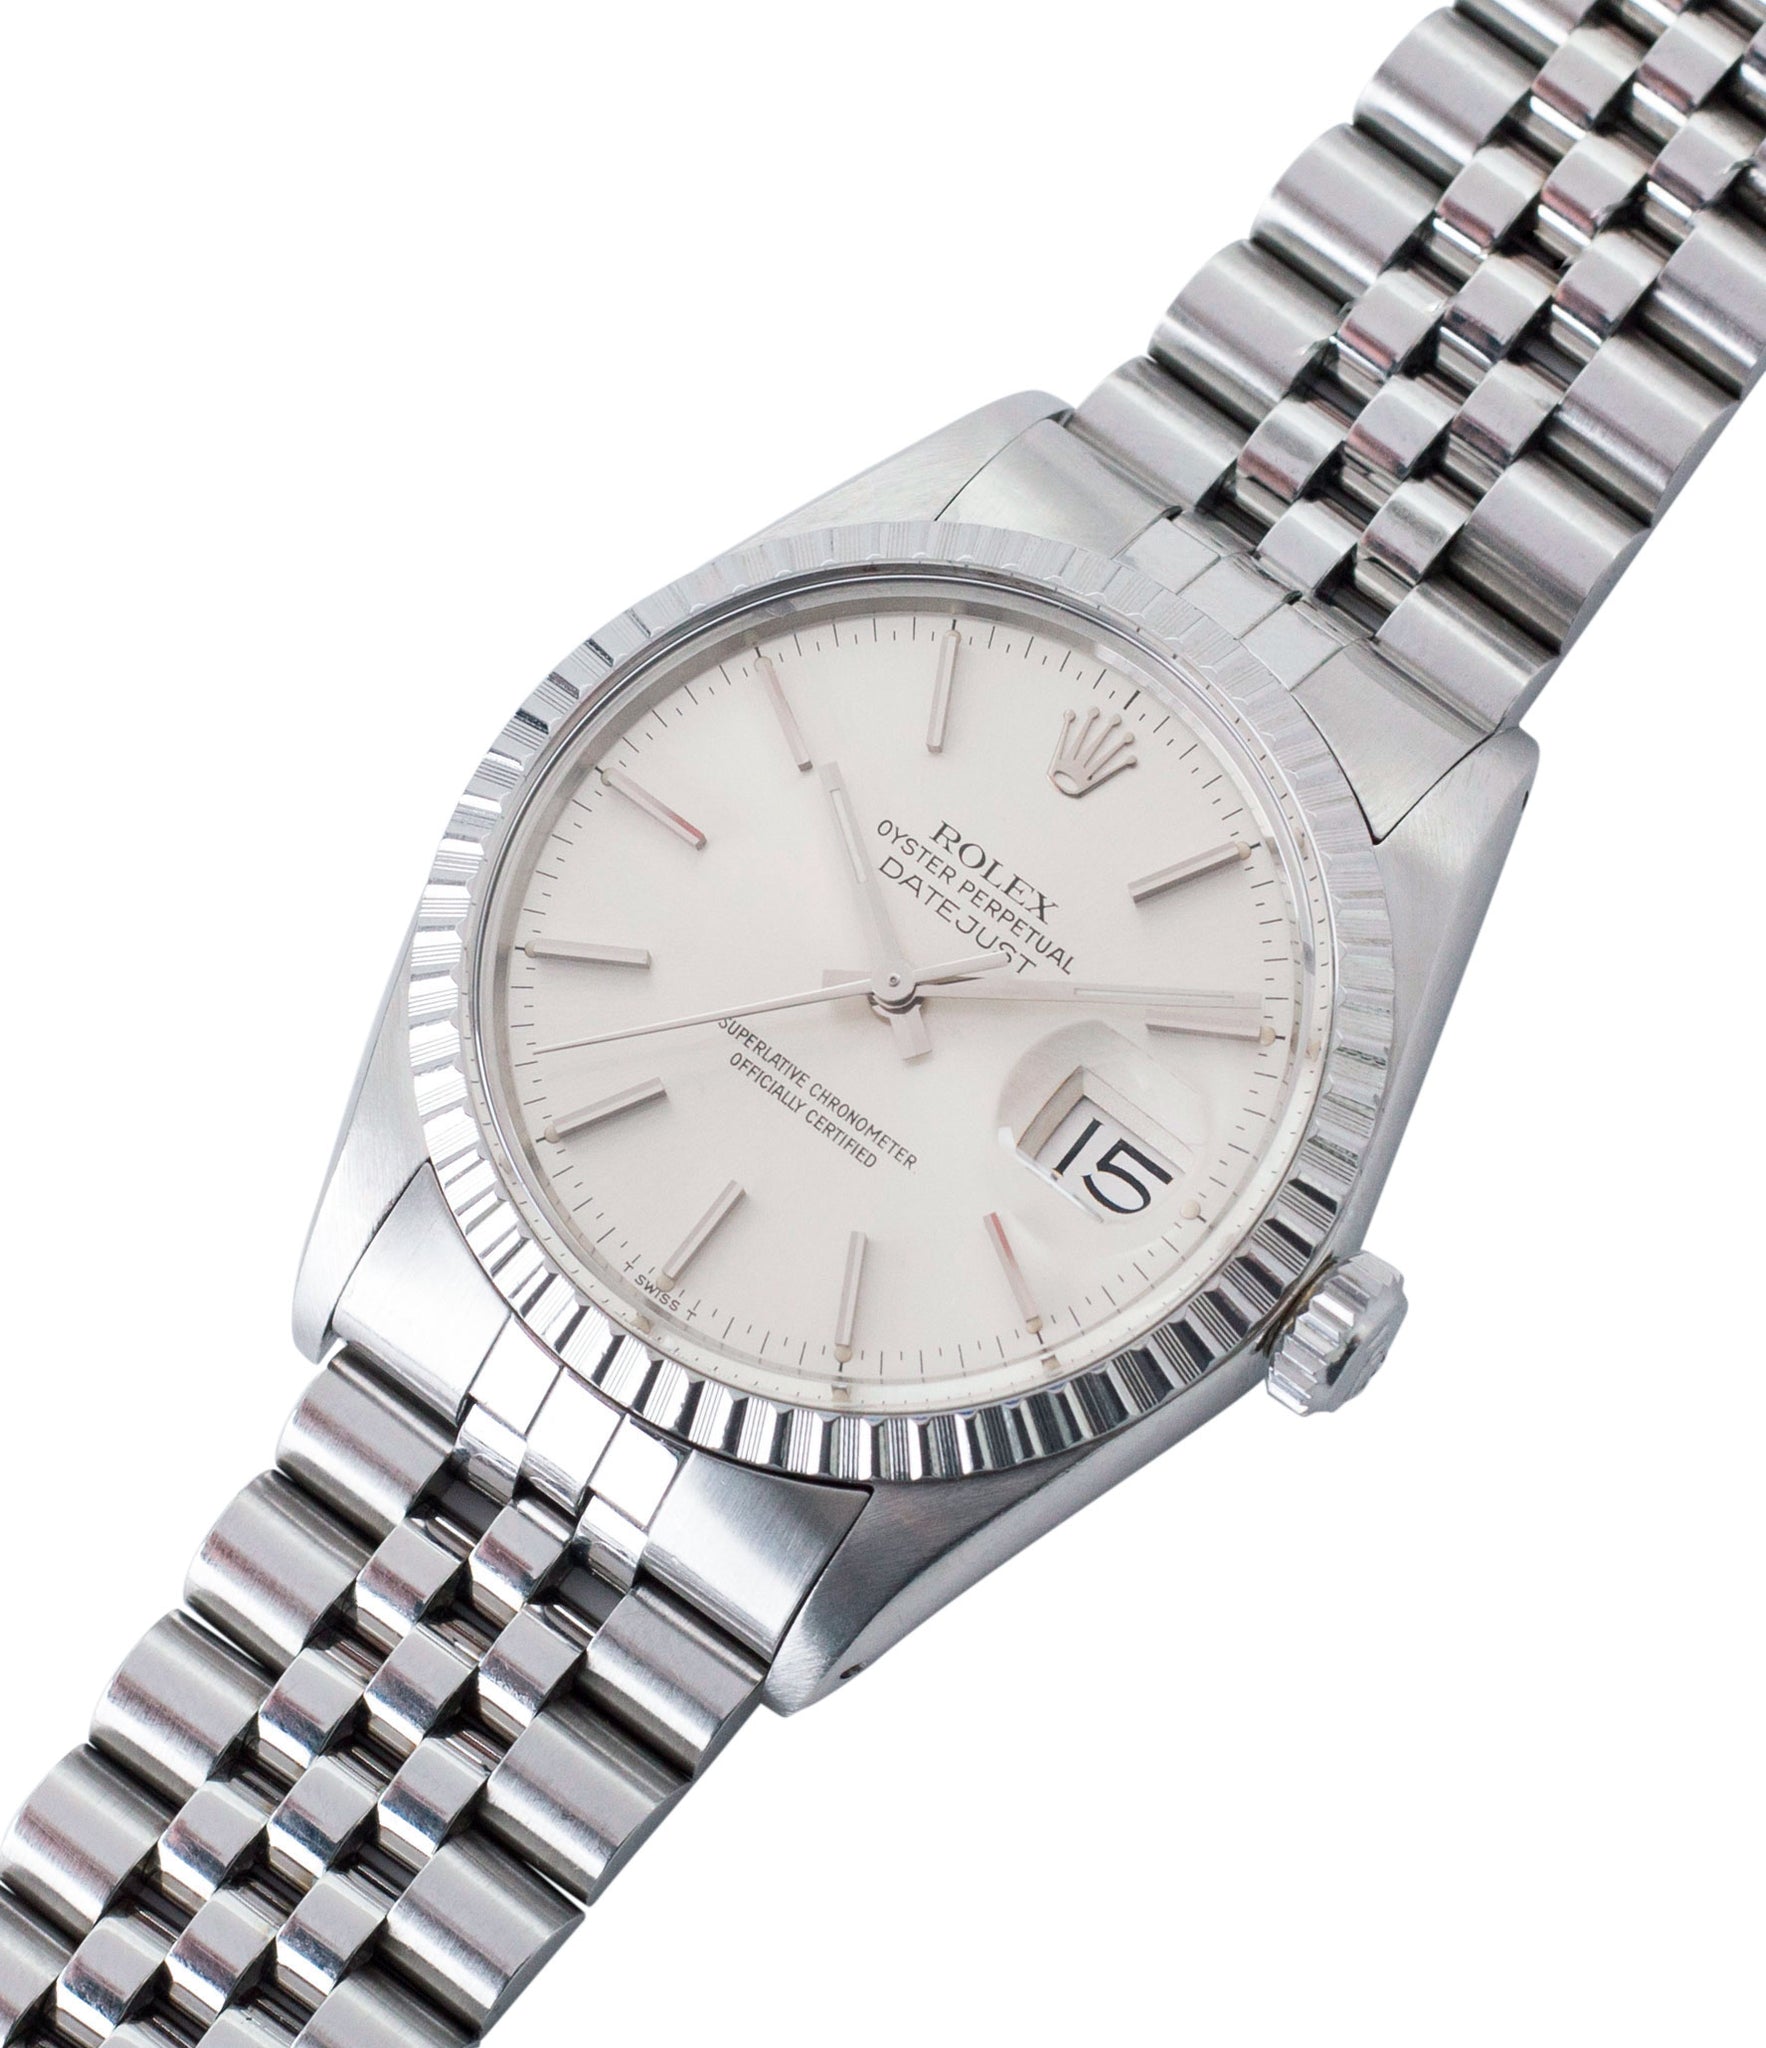 buying vintage full set Rolex Oyster Perpetual Datejust 16030 steel automatic silver dial watch Jubilee bracelet for sale online at A Collected Man London UK vintage watch specialist